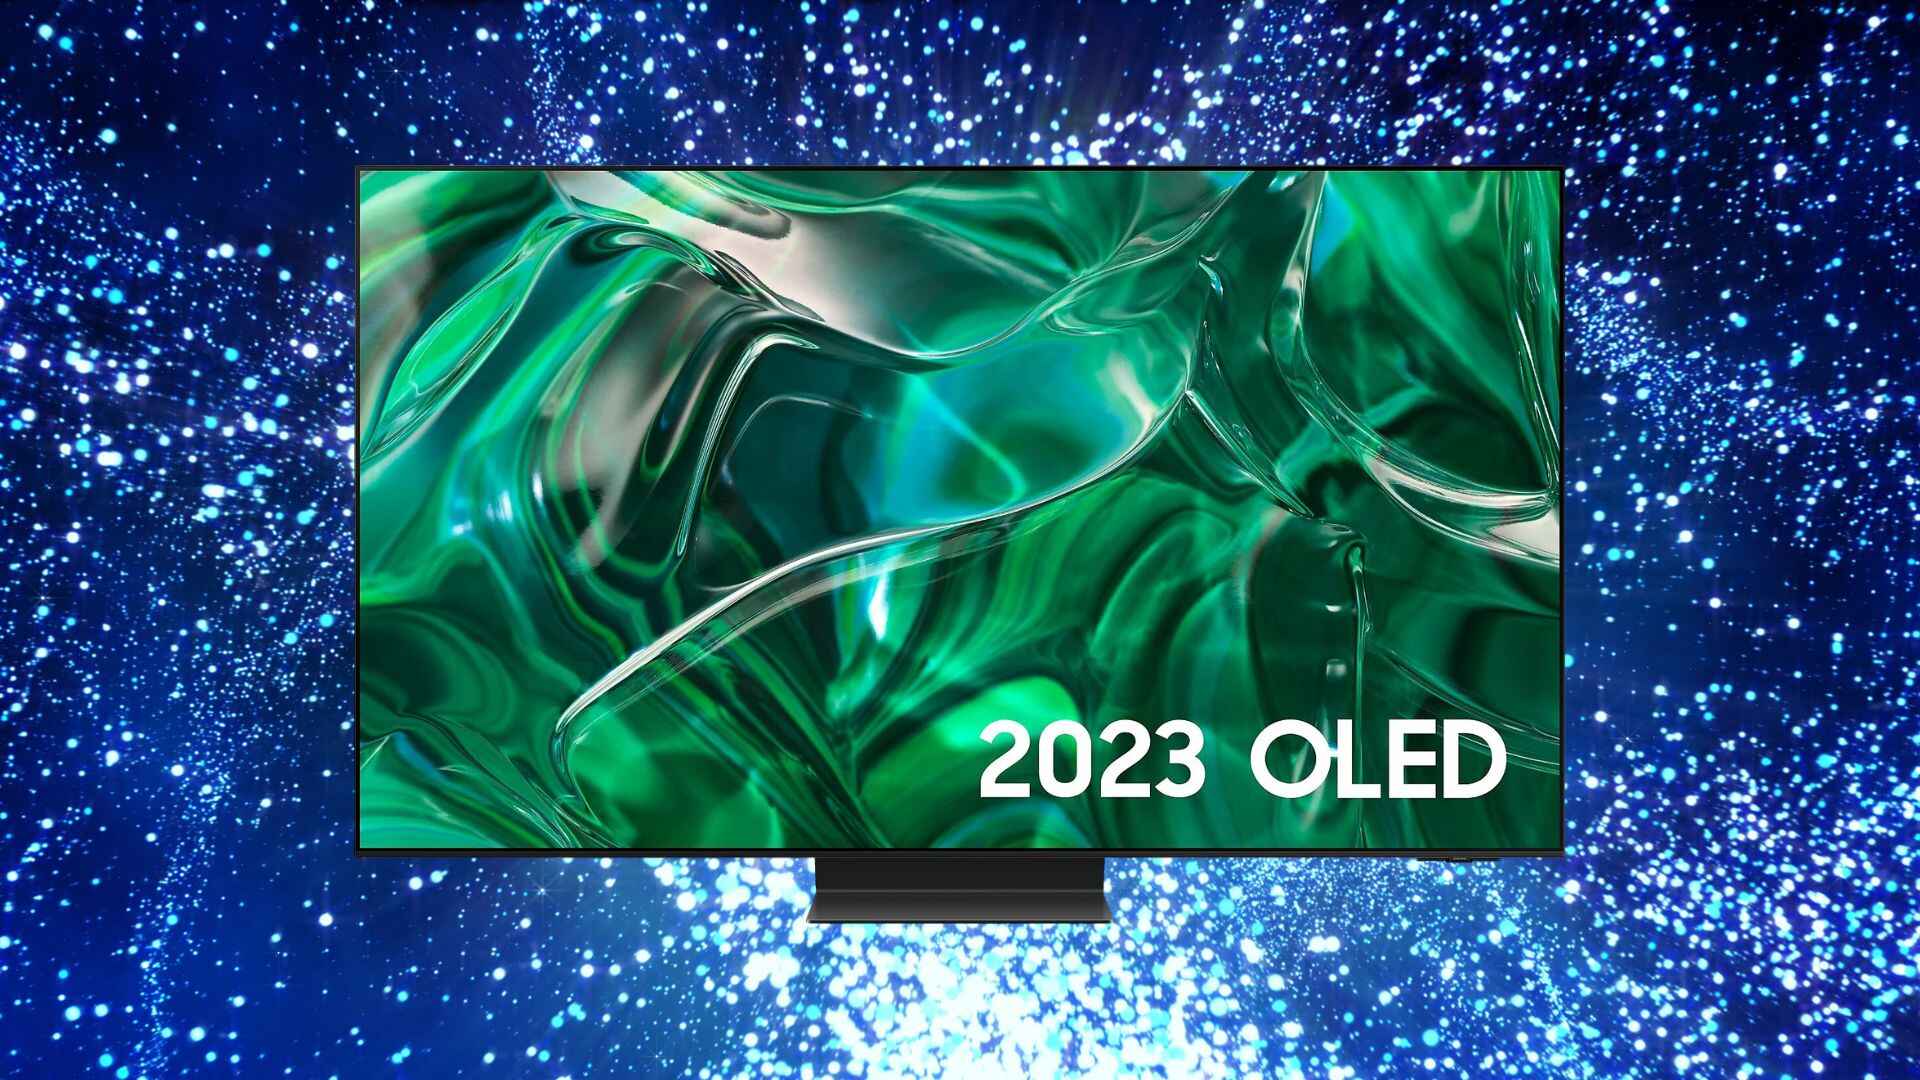 Where To Buy An OLED TV